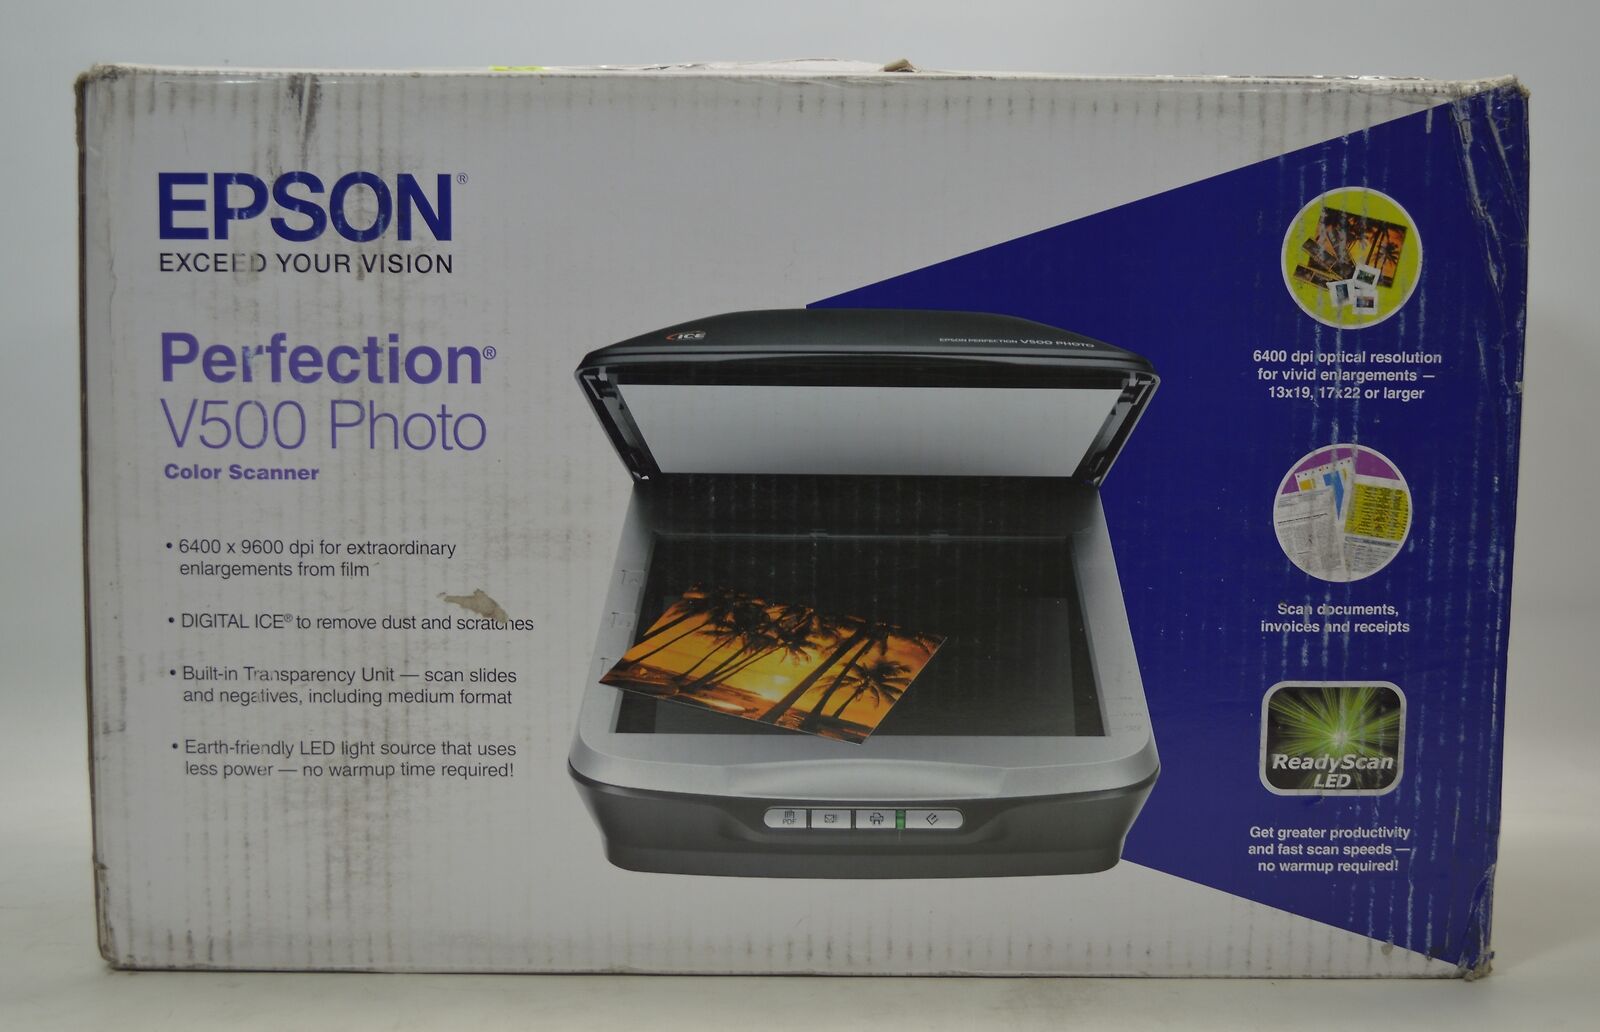 Epson Perfection V500 Photo Color Flatbed Scanner